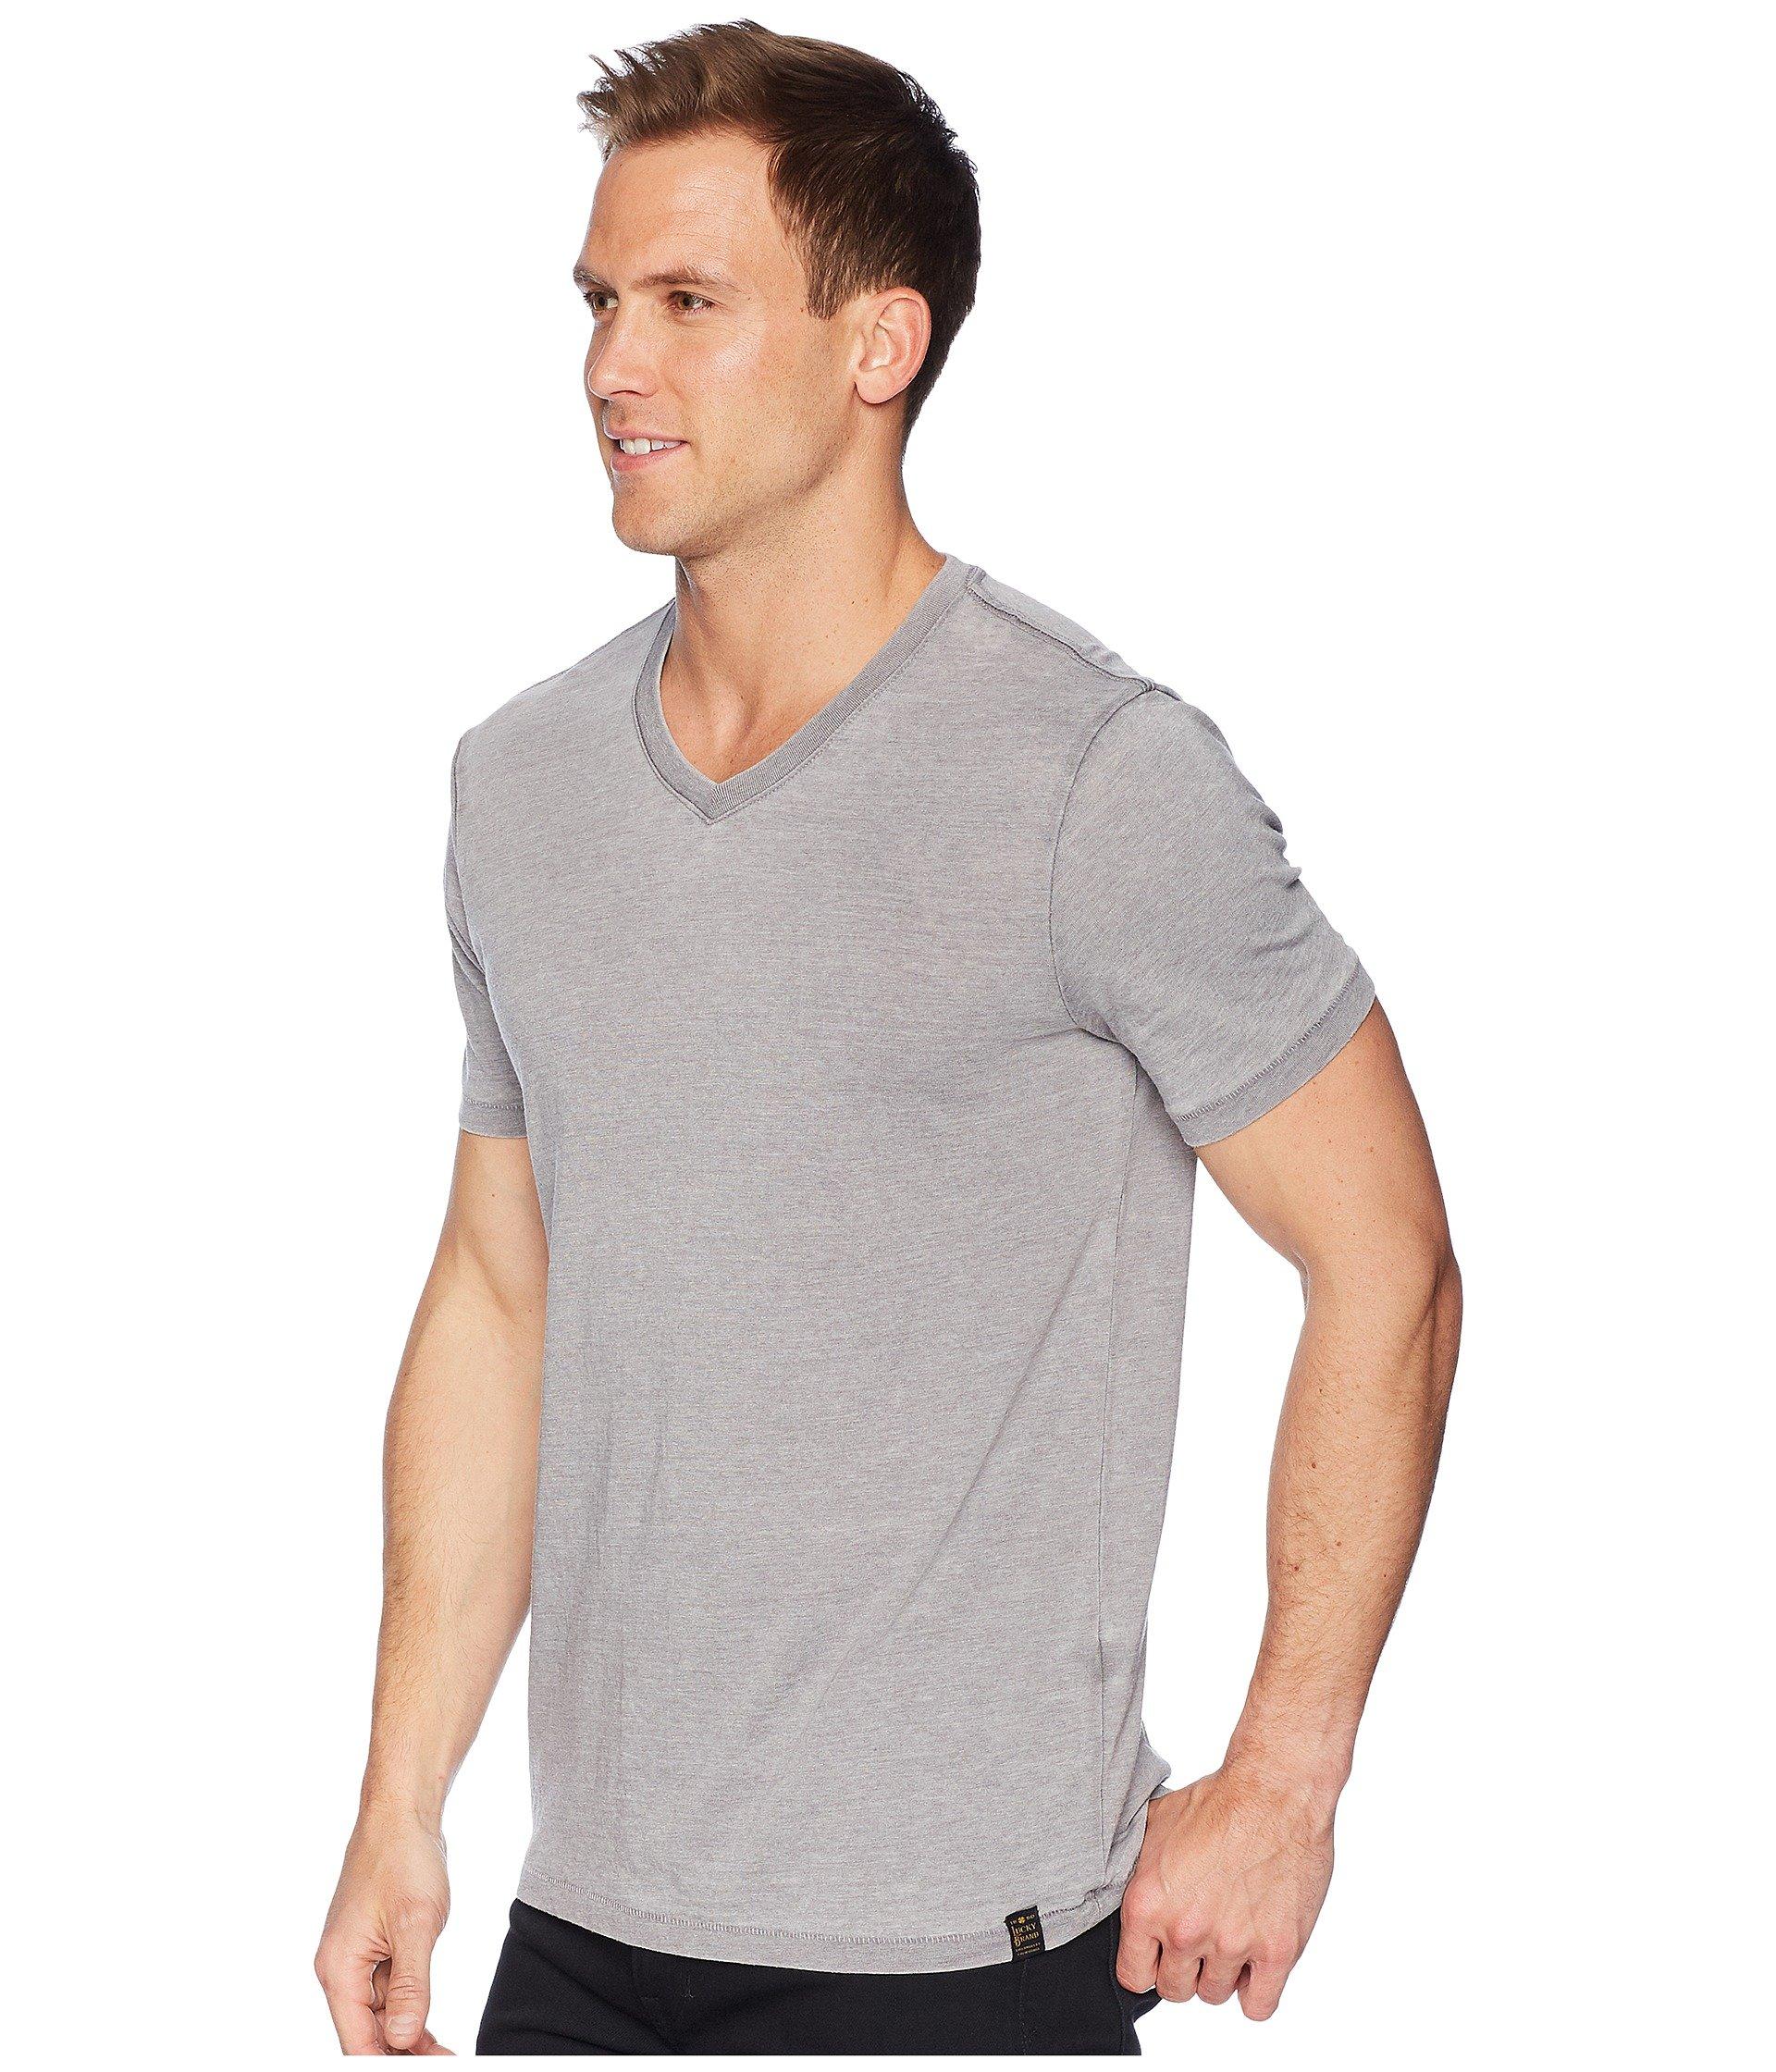 Lucky Brand Synthetic Venice Burnout V-neck Tee in Gray for Men - Lyst